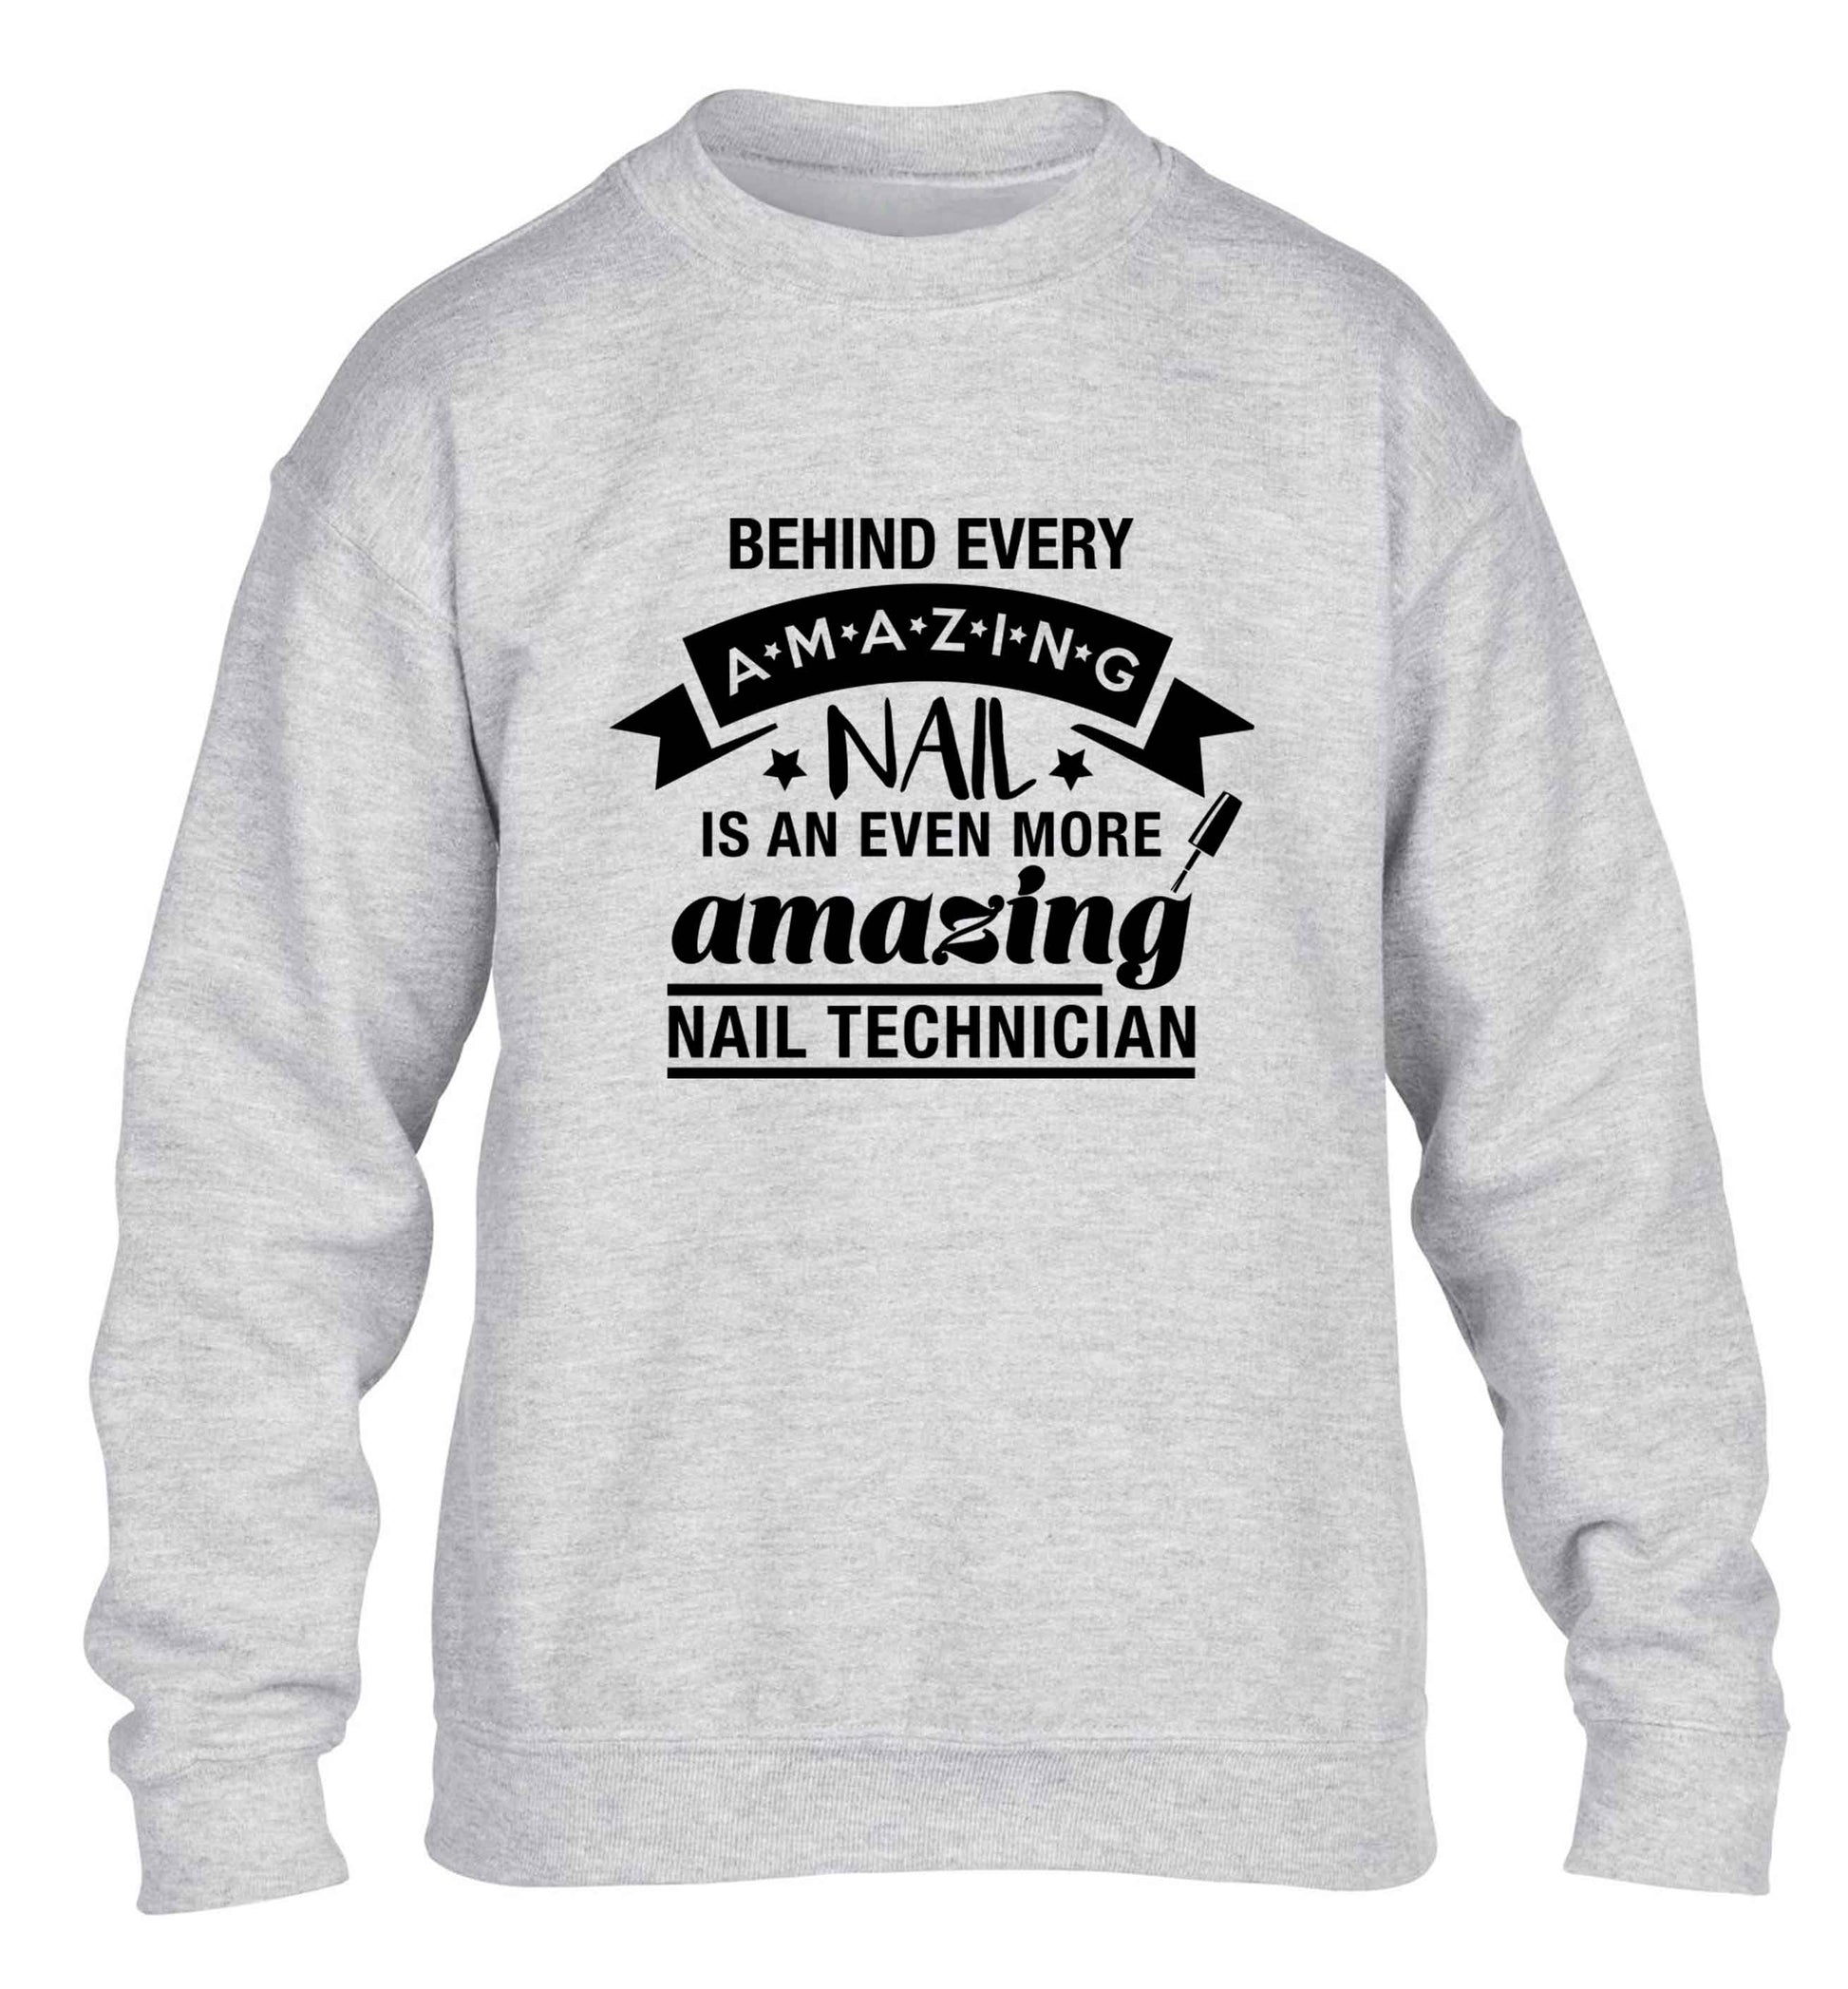 Behind every amazing nail is an even more amazing nail technician children's grey sweater 12-13 Years